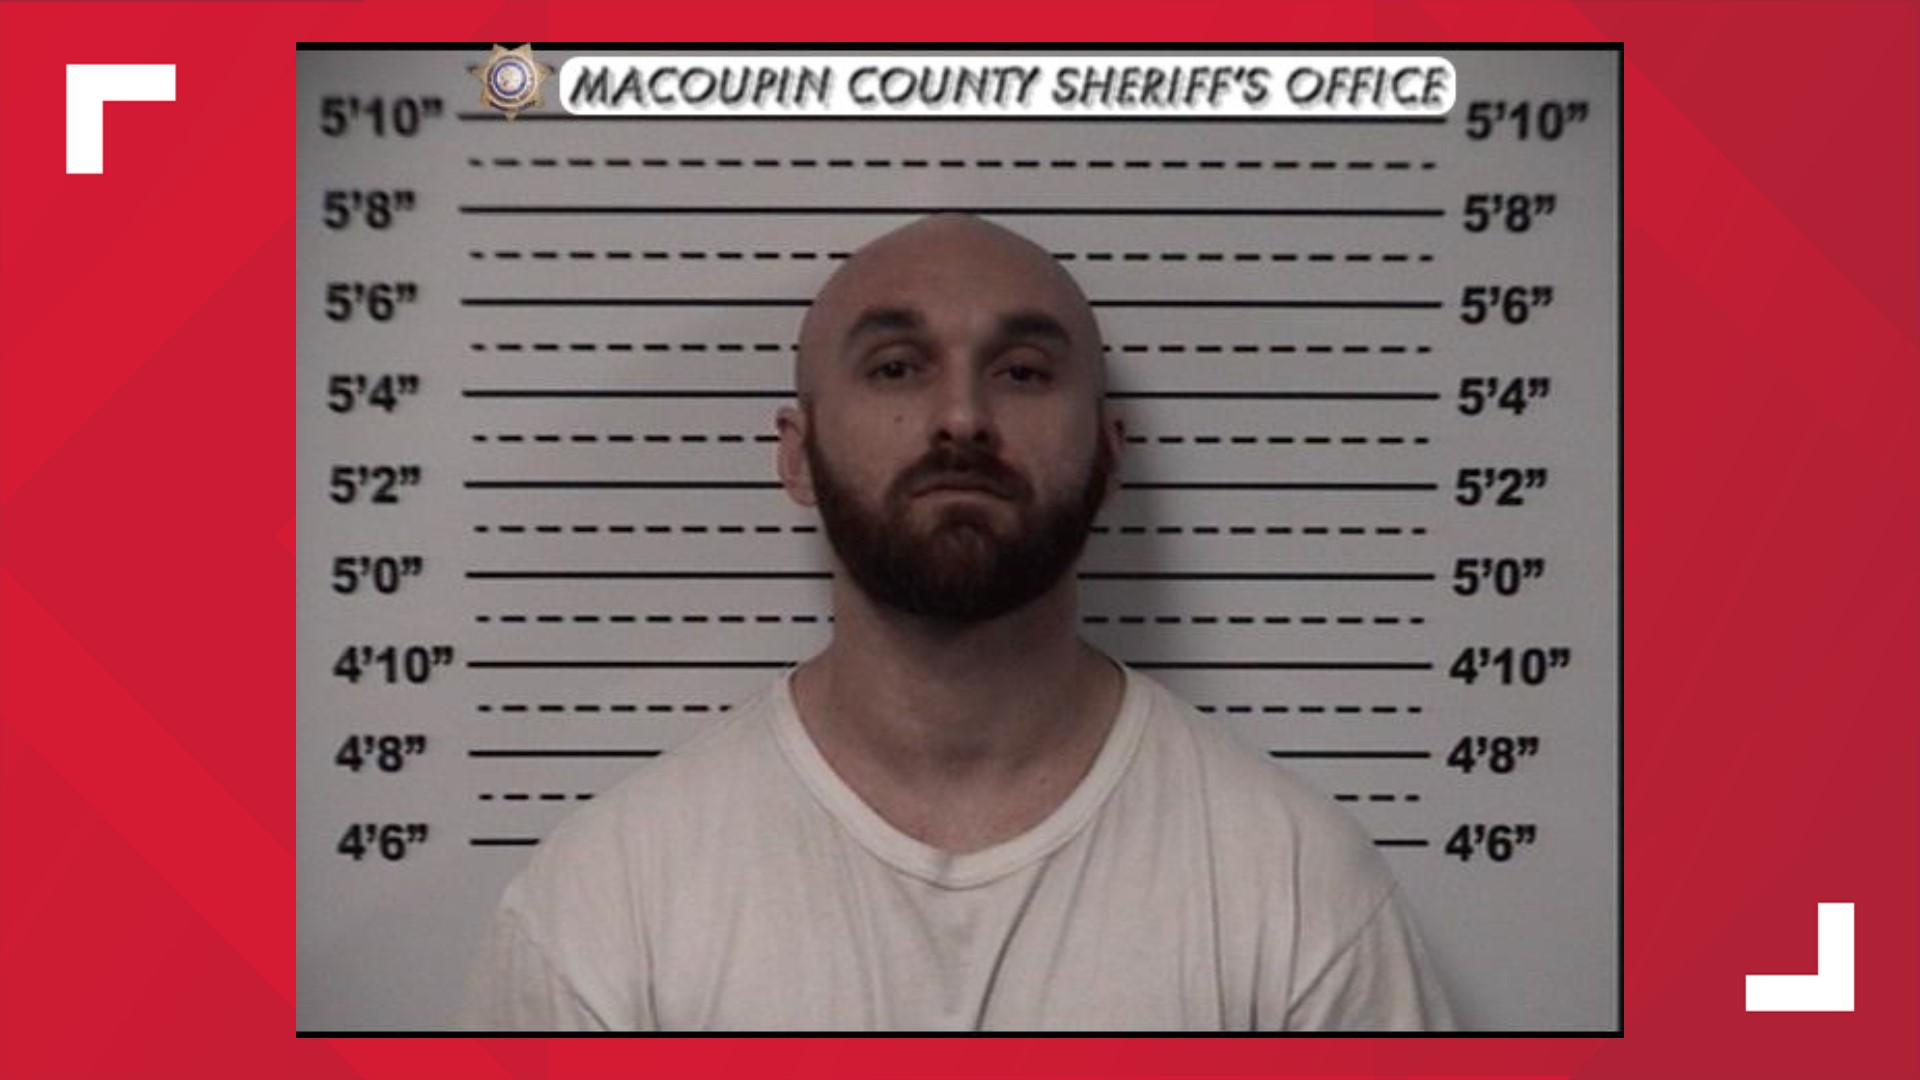 Man who escaped from Macoupin County Jail back in custody